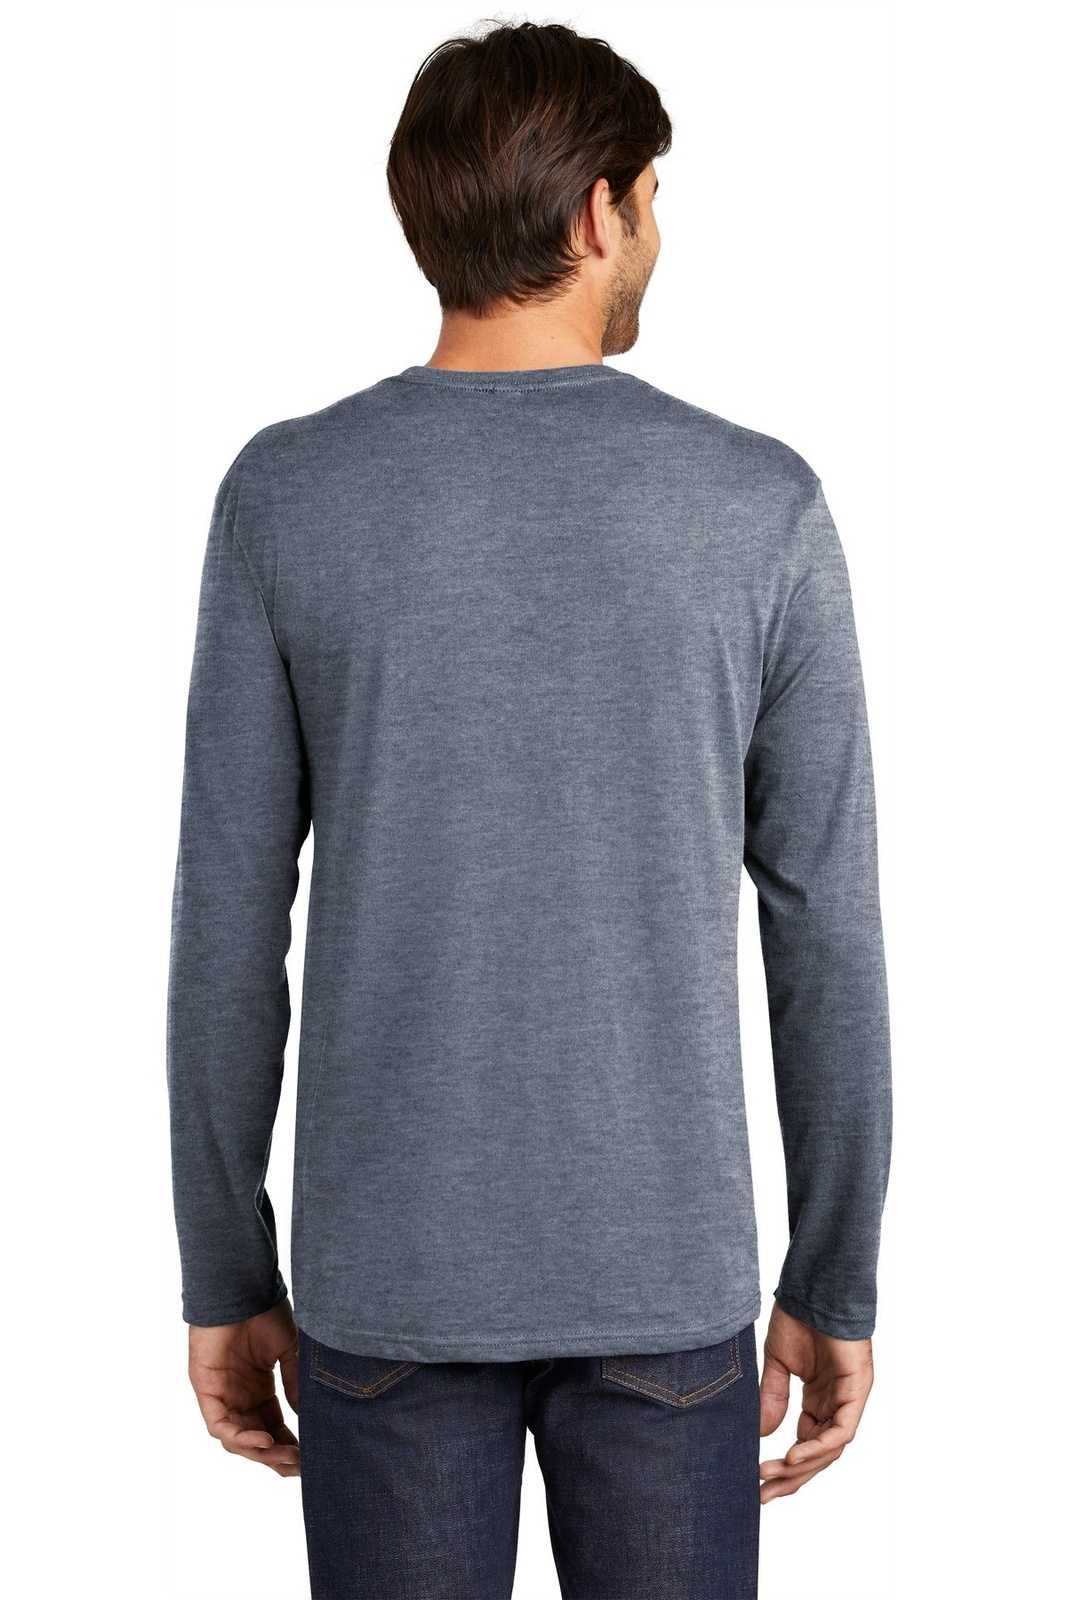 District DT105 Perfect Weight Long Sleeve Tee - Heathered Navy - HIT a Double - 2